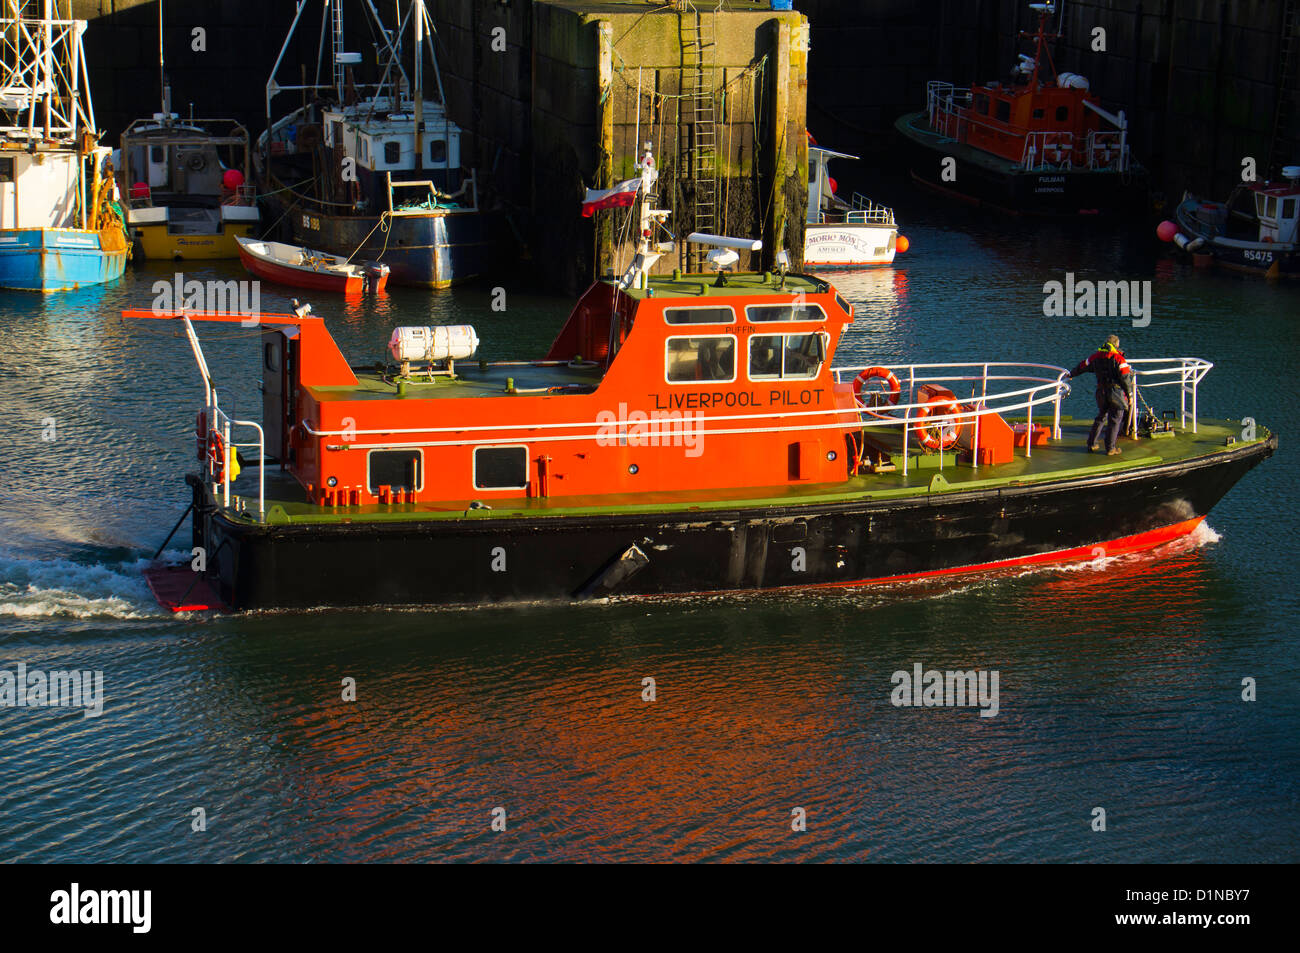 Amlwch Port Amlwch Anglesey North Wales Uk. Outer Harbour. Puffin Liverpool Pilot launch coming in to berth. Stock Photo